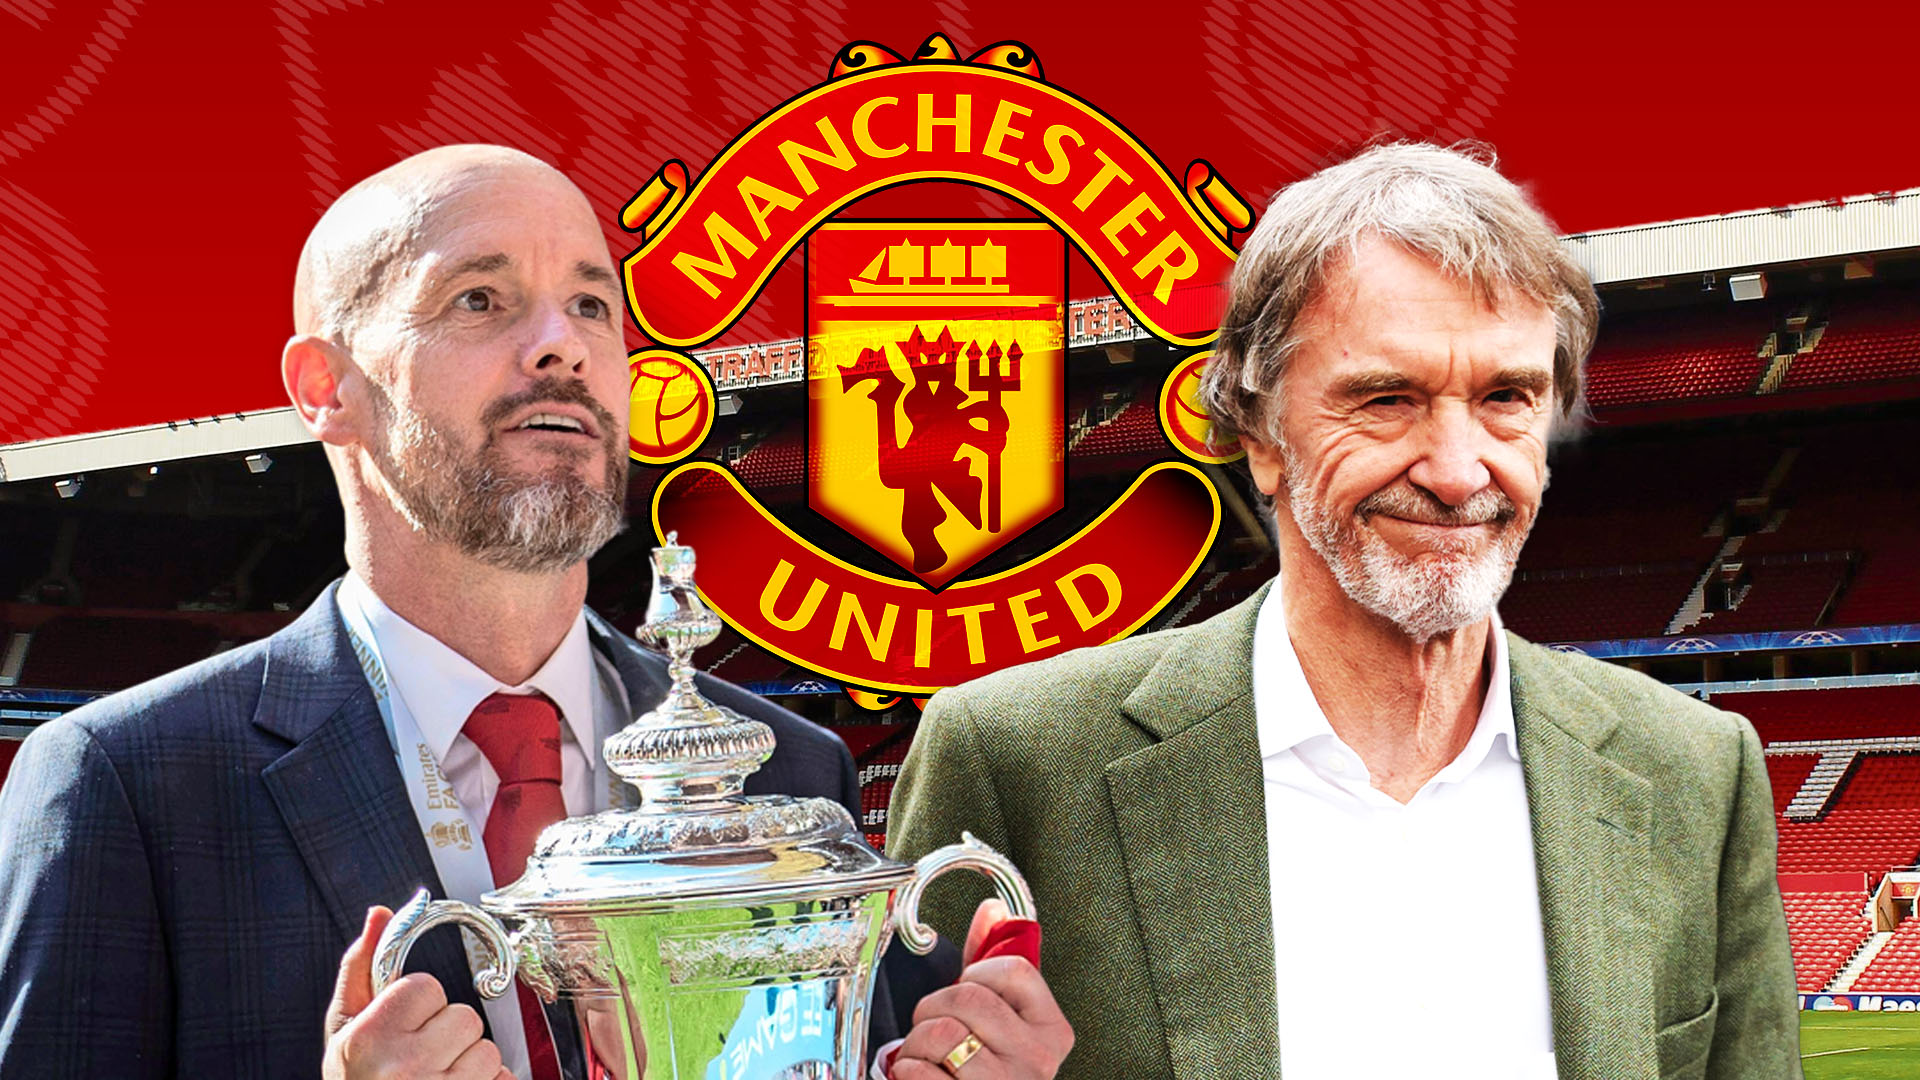 Erik ten Hag signs one-year extension at Man Utd after avoiding sack in dramatic U-turn after shock FA Cup final win [Video]